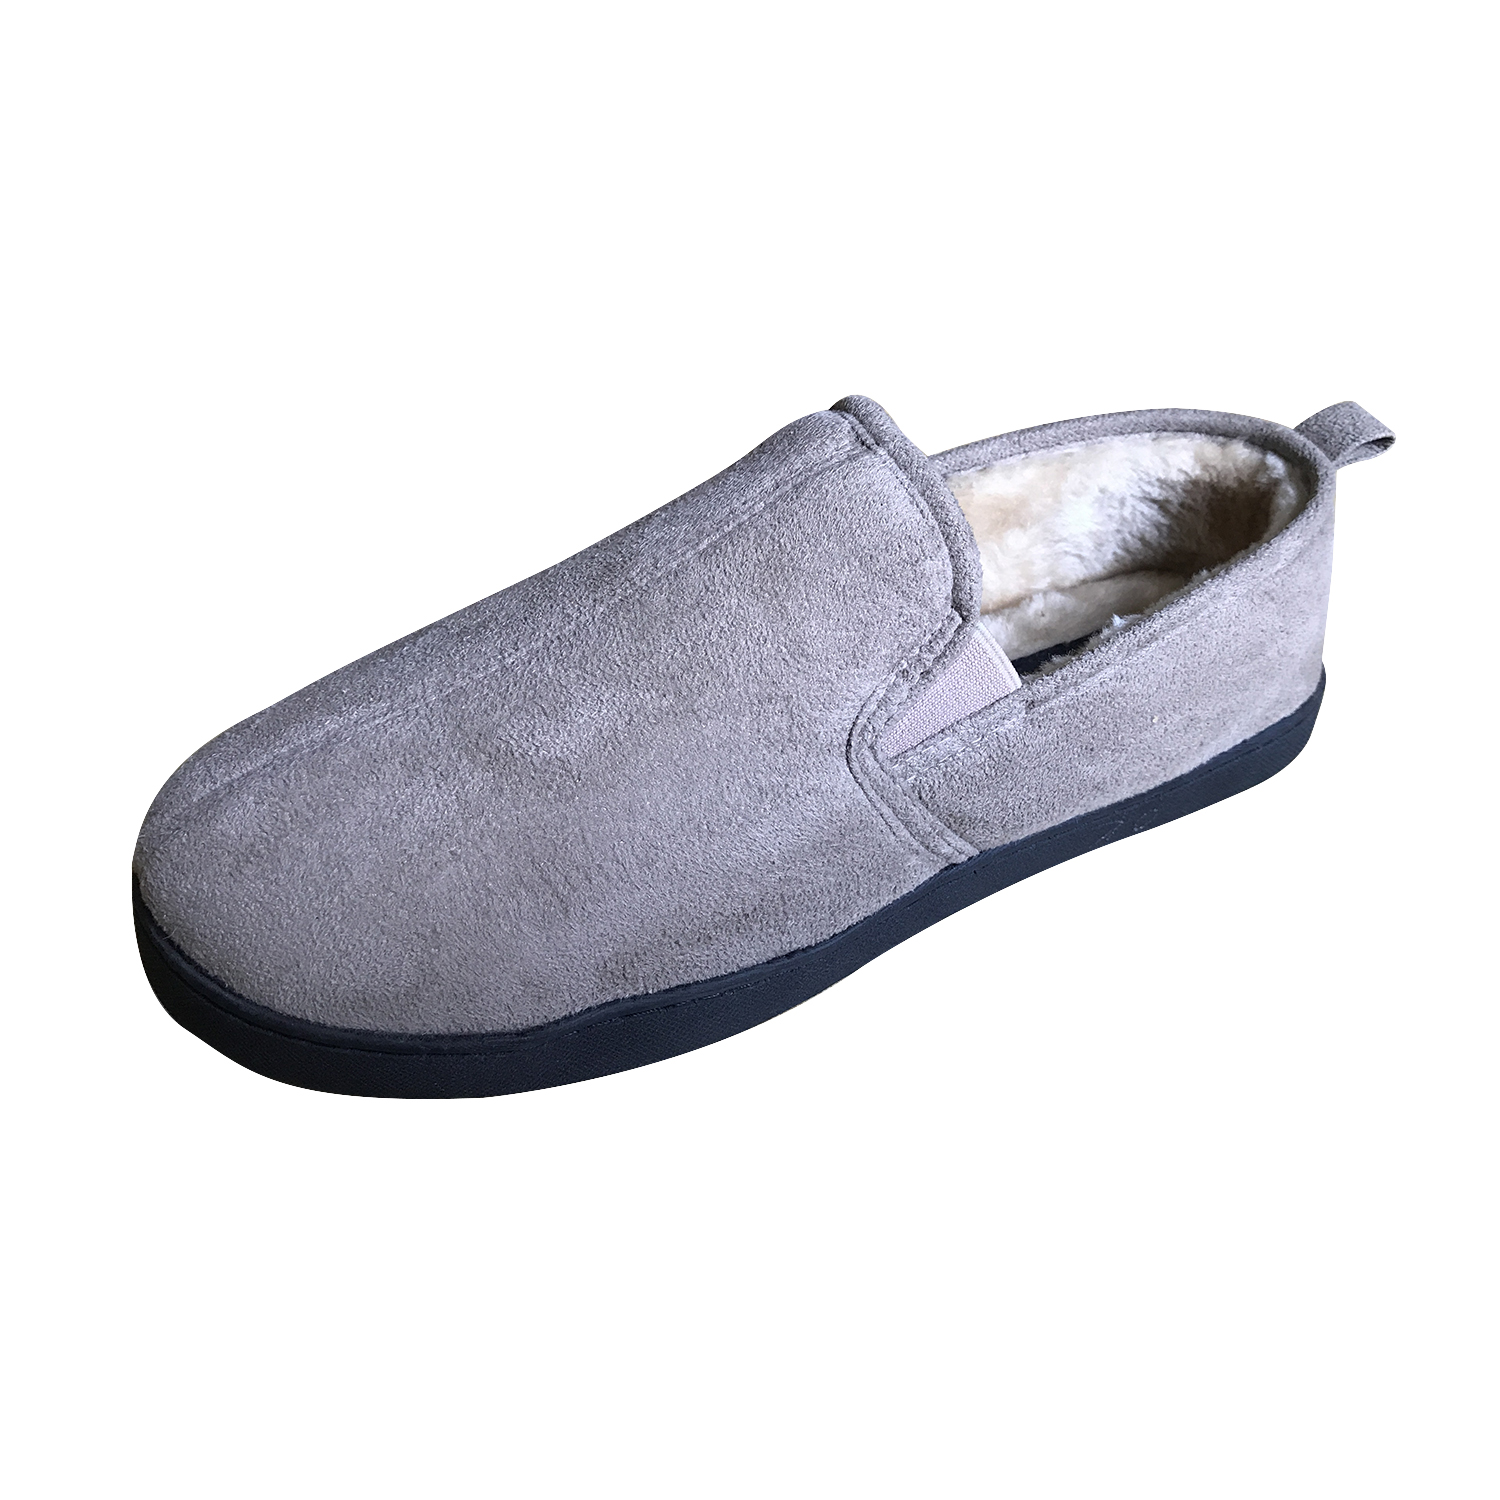  Mens Slippers Memory Foam Plush Winter Warm House Slippers Nonslip Rubber Moccasin Slippers for Men Indoor Outdoor 